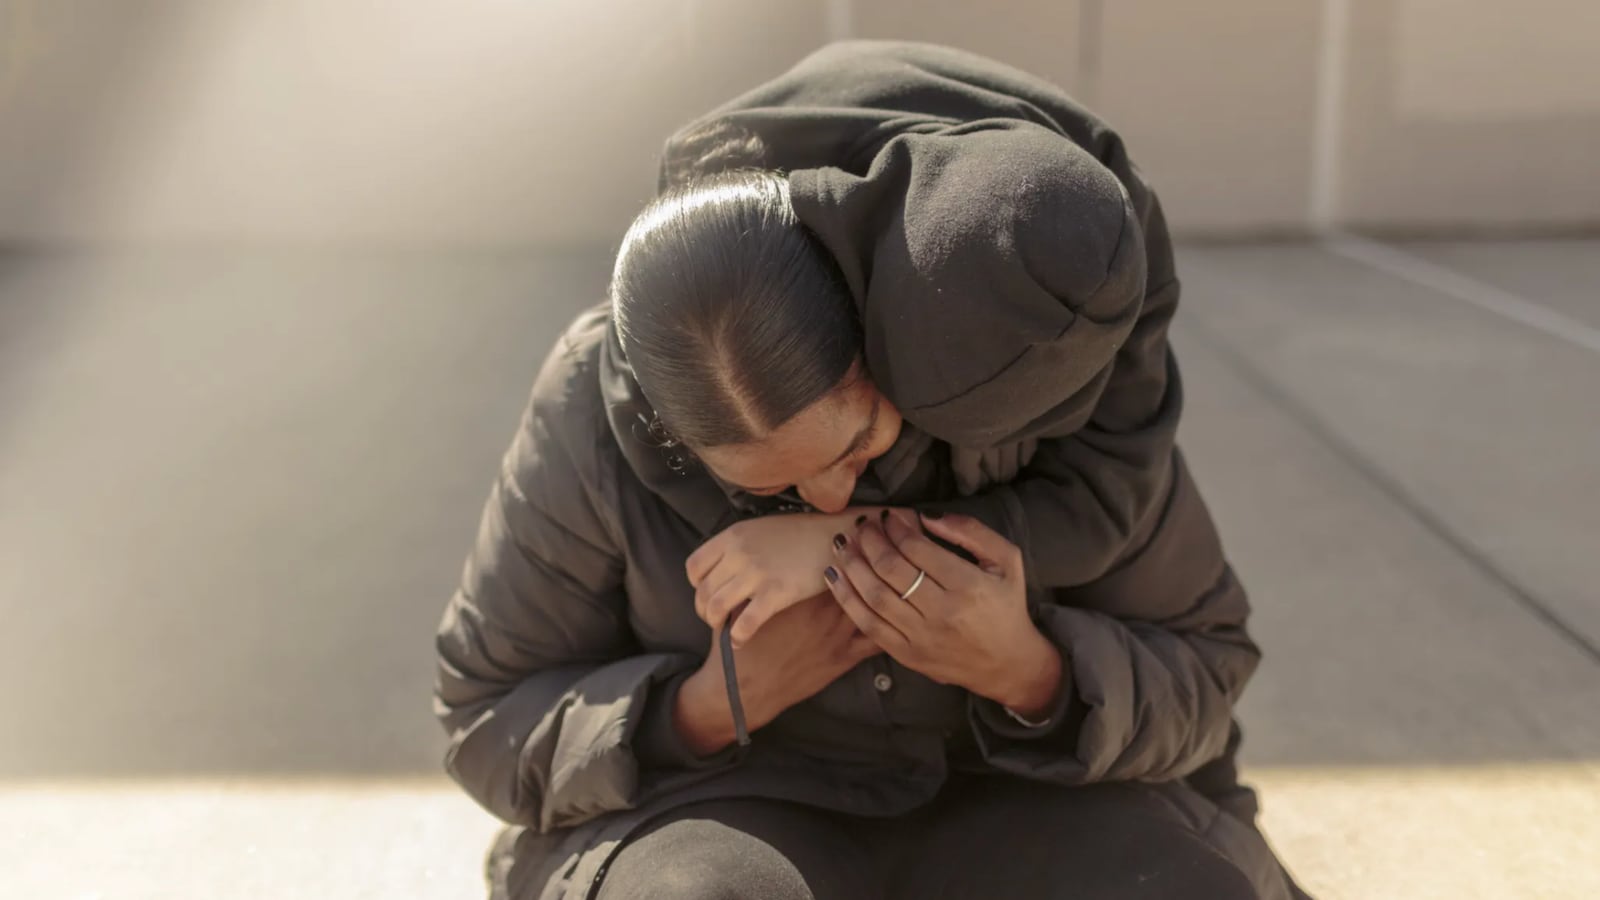 A boy wearing a hooded sweatshirt with his face obscured hugs his mom.